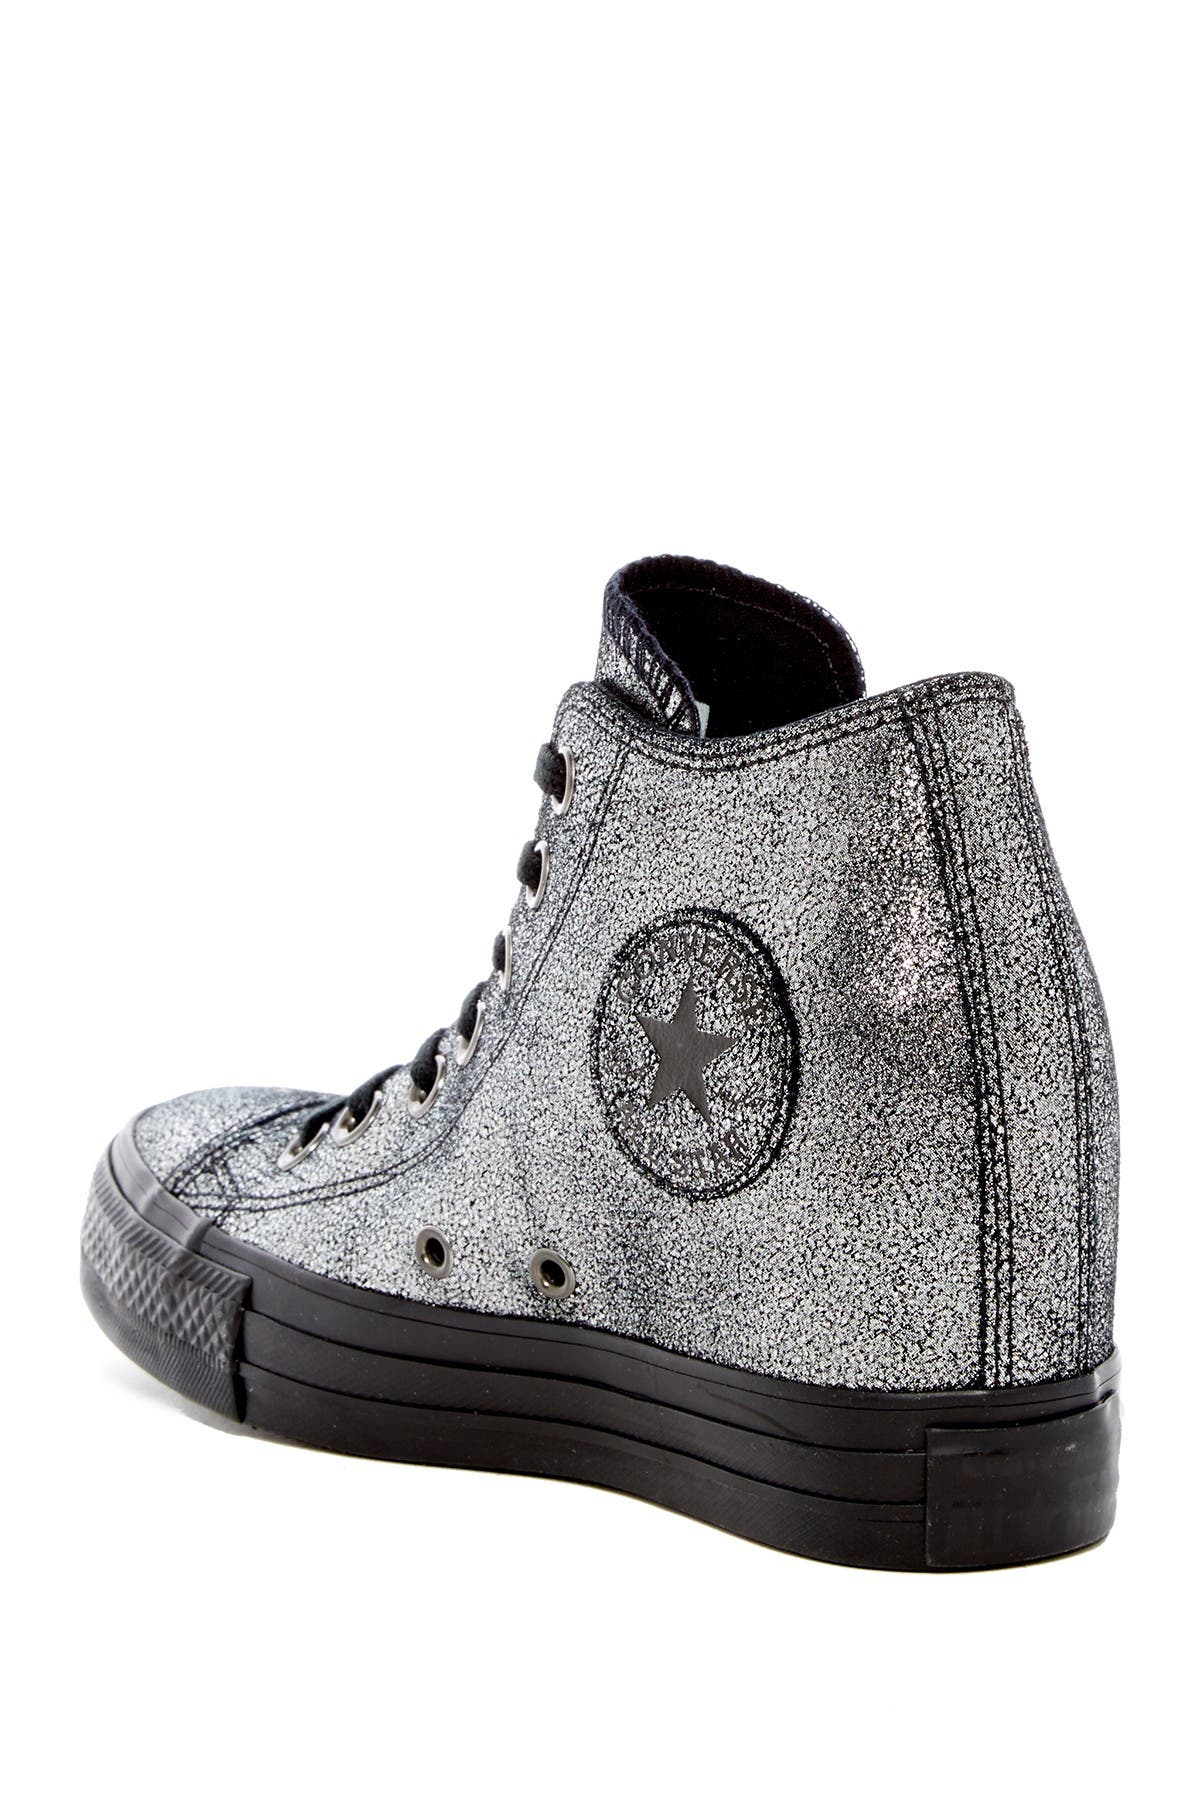 Converse | Chuck Taylor Lux Mid Wedge 